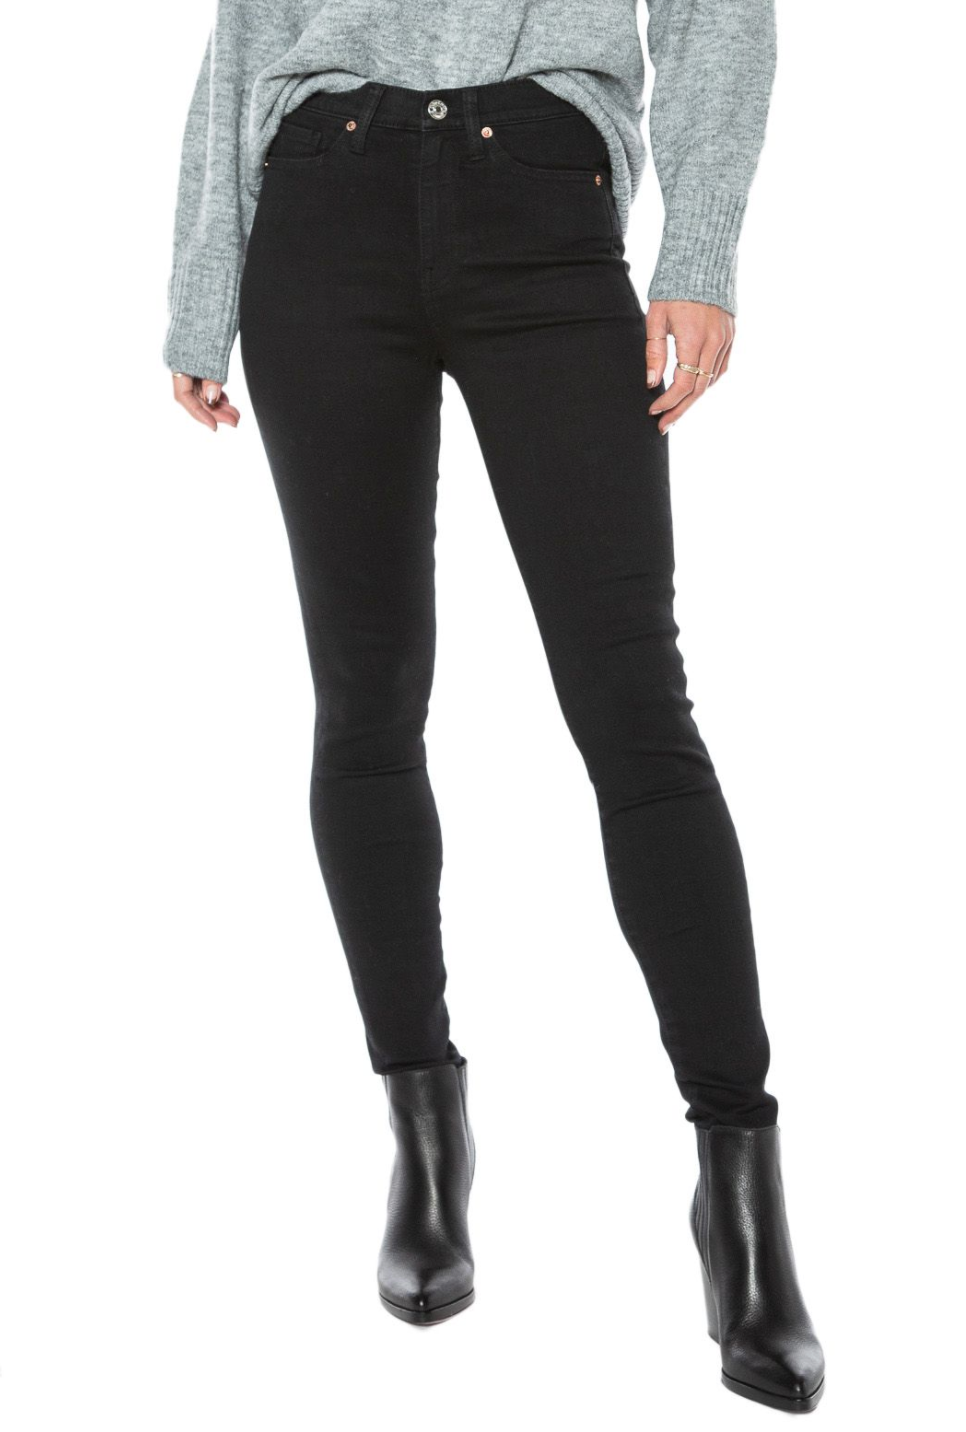 Juicy Couture Melrose High Rise Skinny